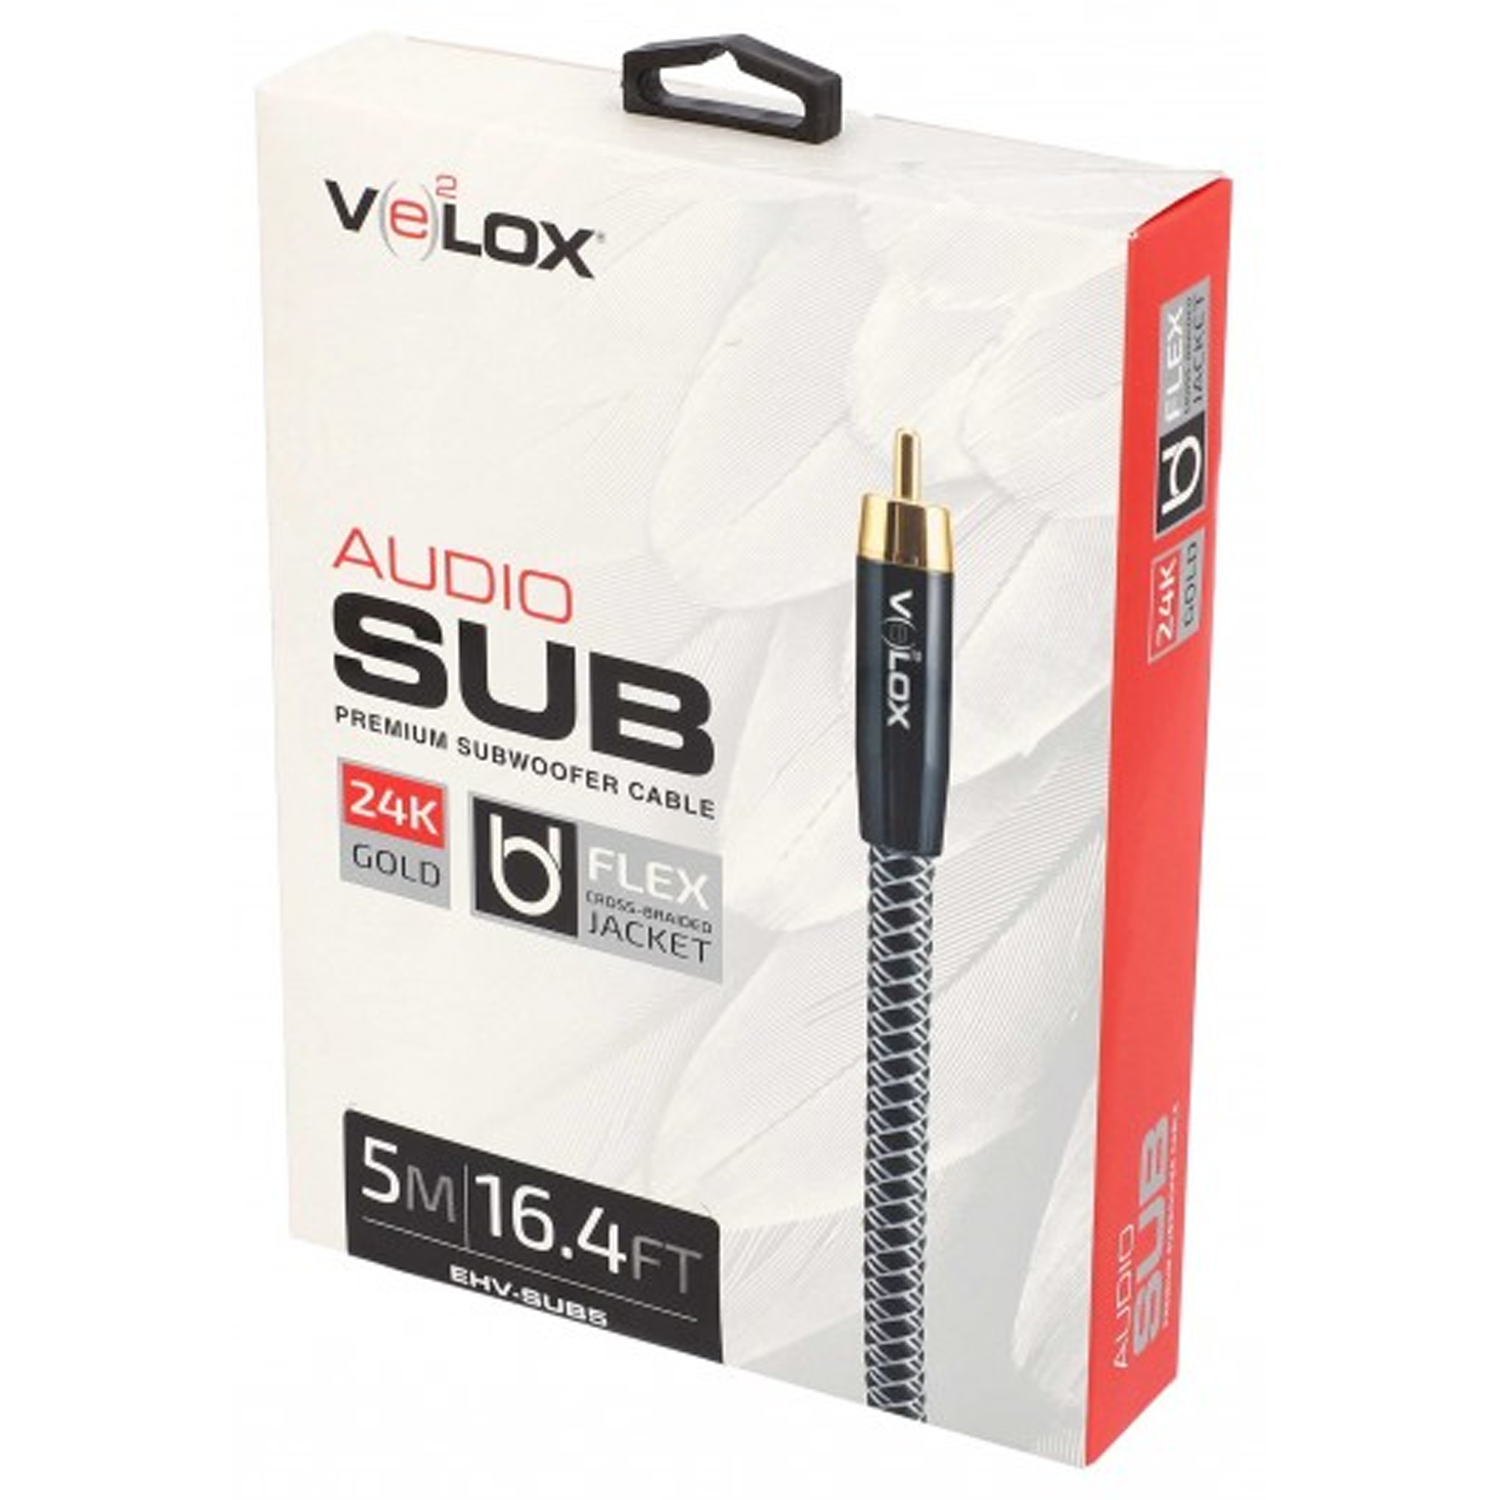 ETHEREAL EHV-SUB 16ft Velox Premium Subwoofer Cable |